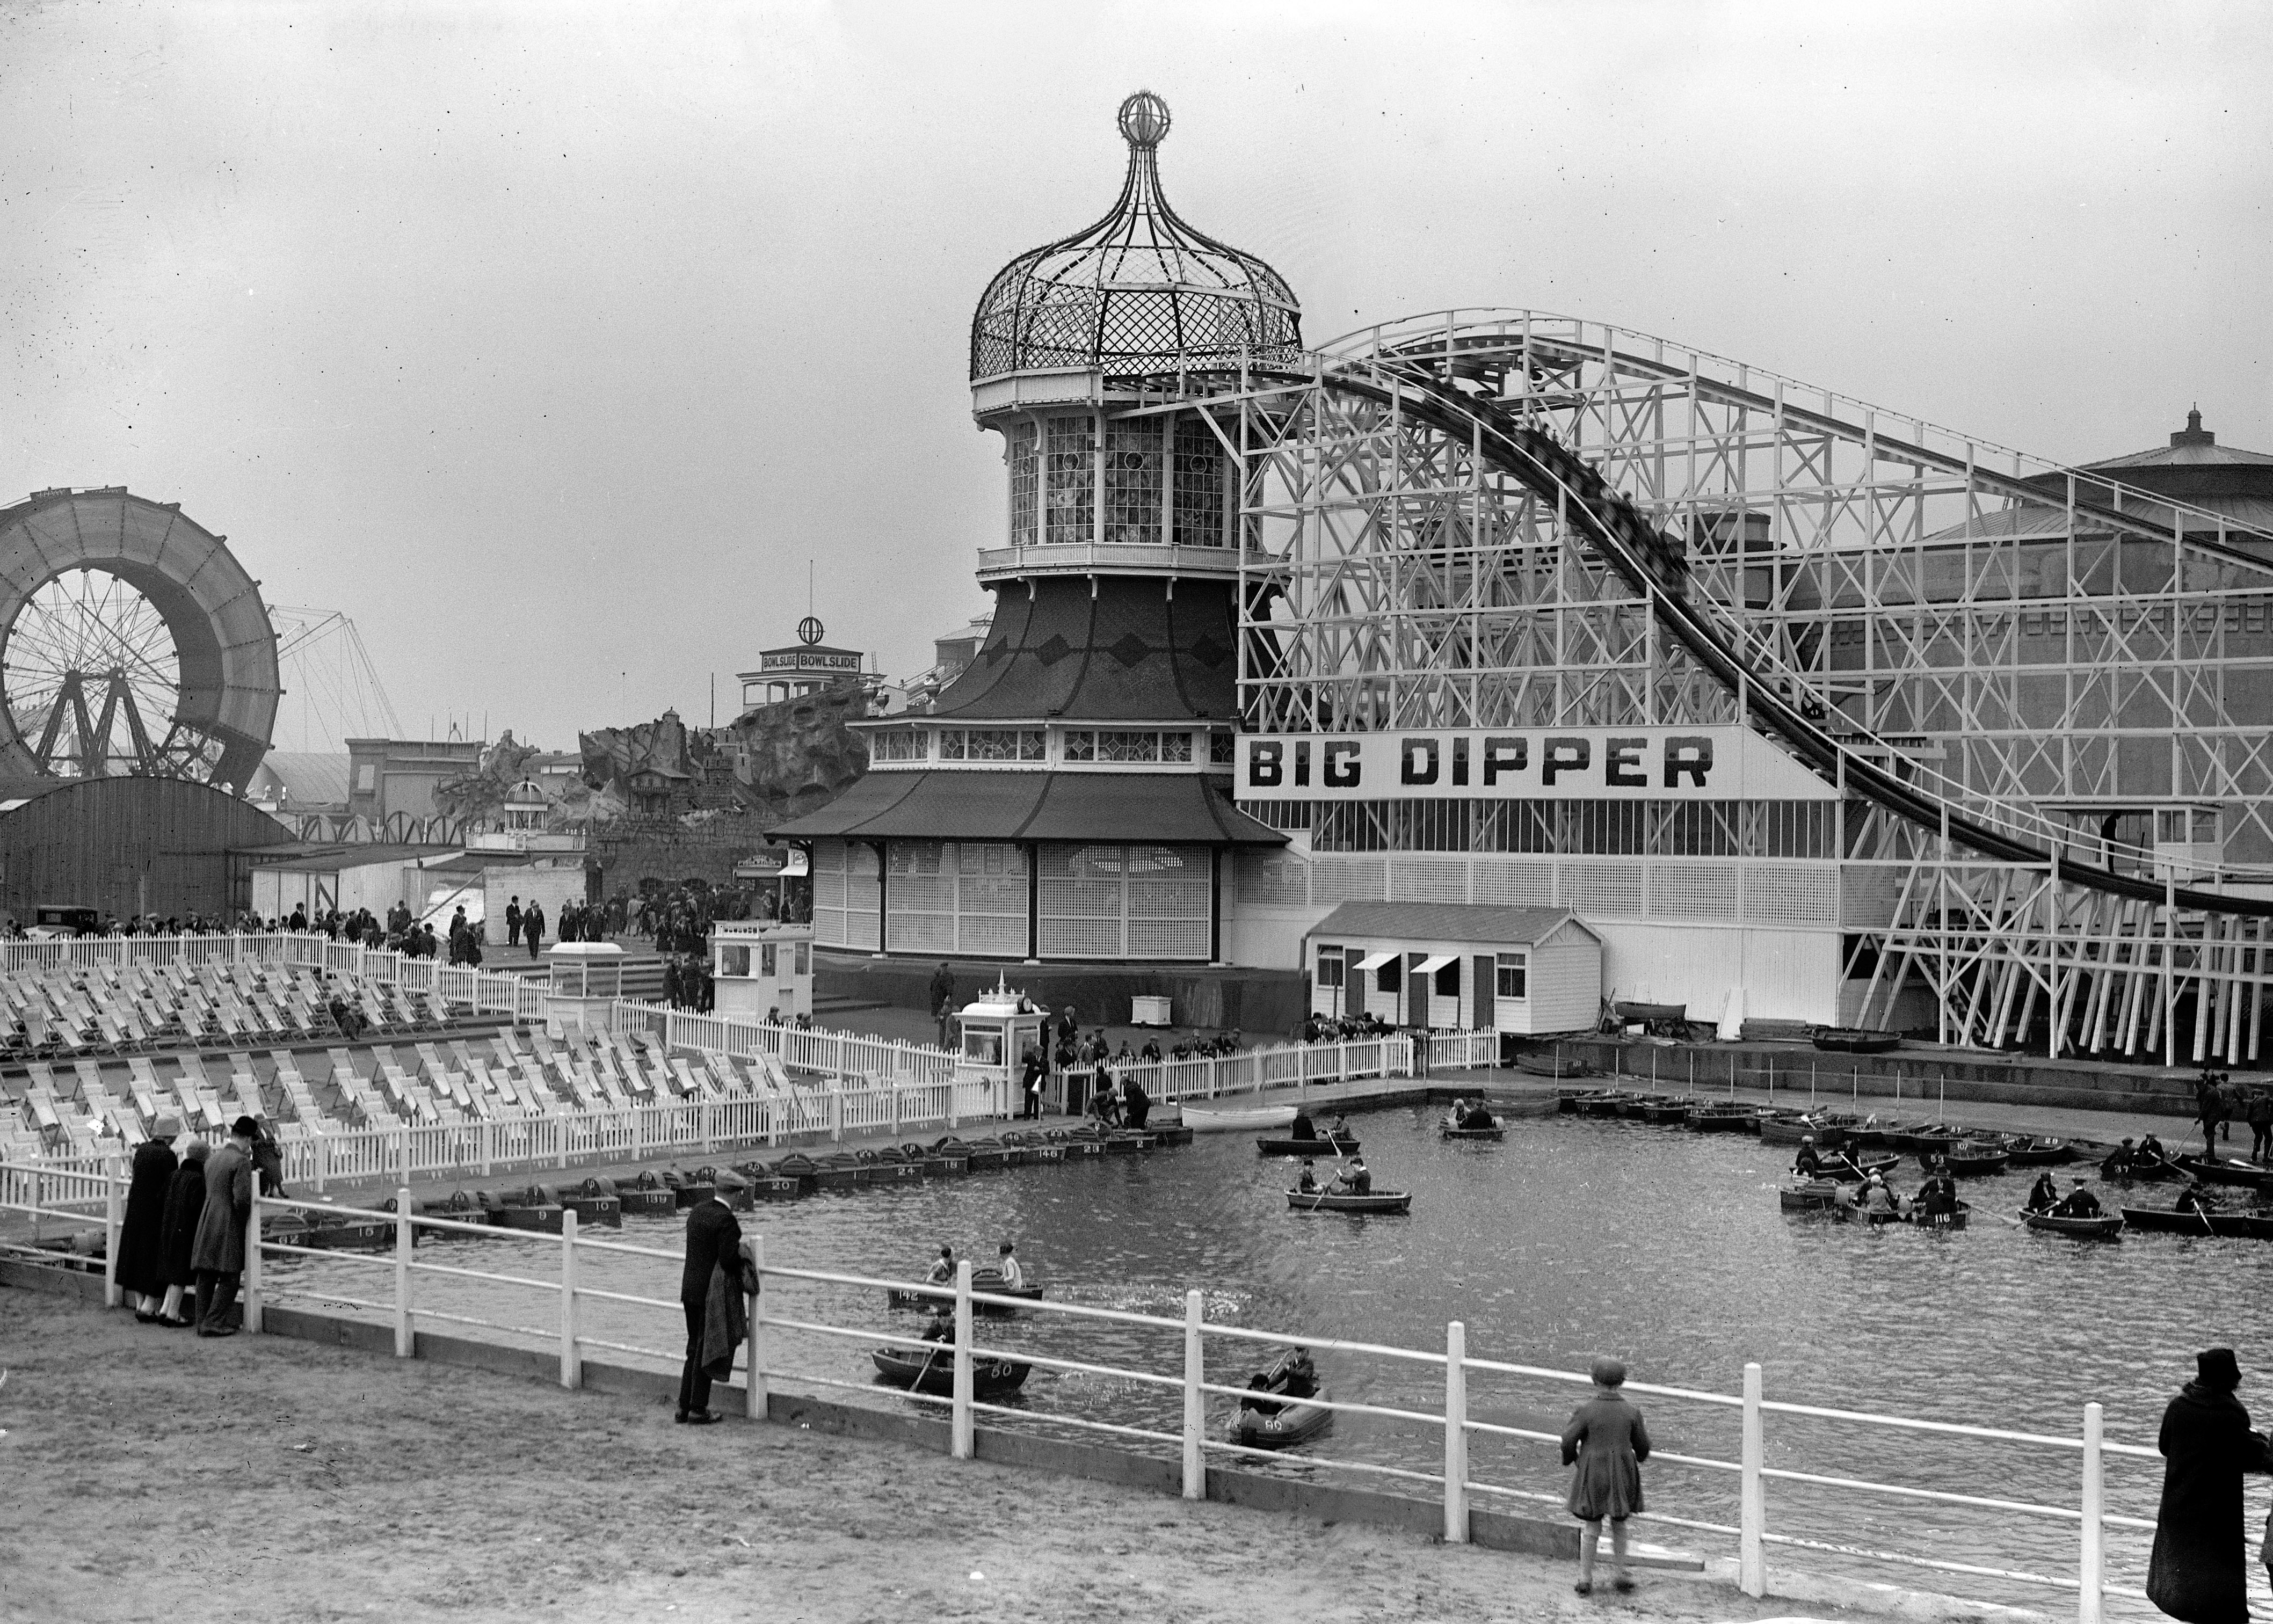 Last year, the Big Dipper celebrated its centenary, making it one of the oldest wooden rollercoasters in the world